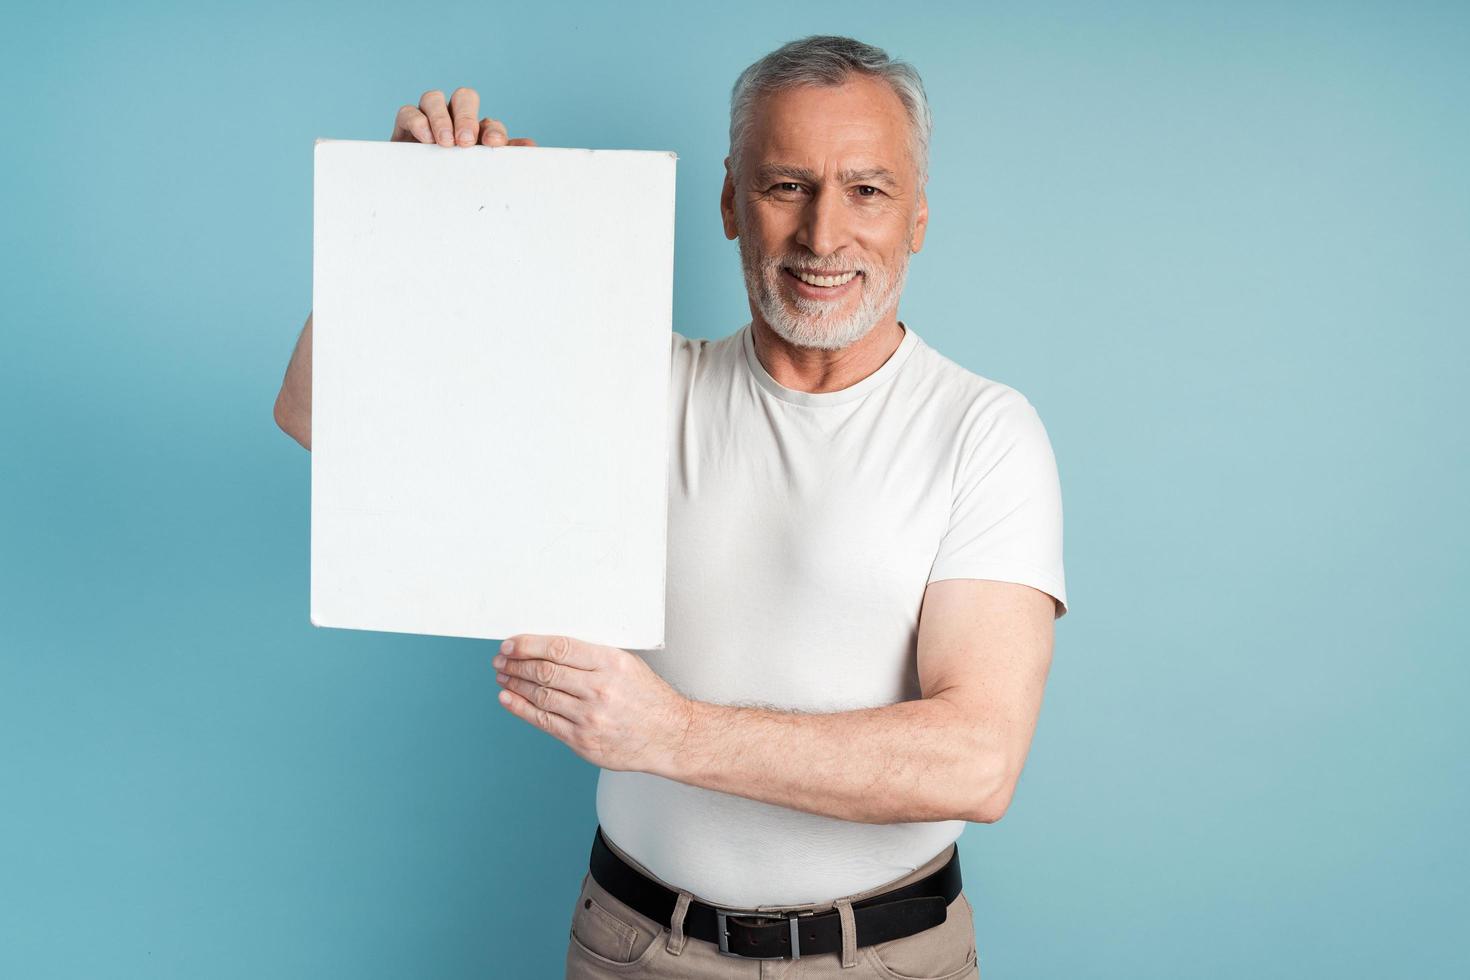 Smiling retiree with a beard holding a blank sheet of paper photo